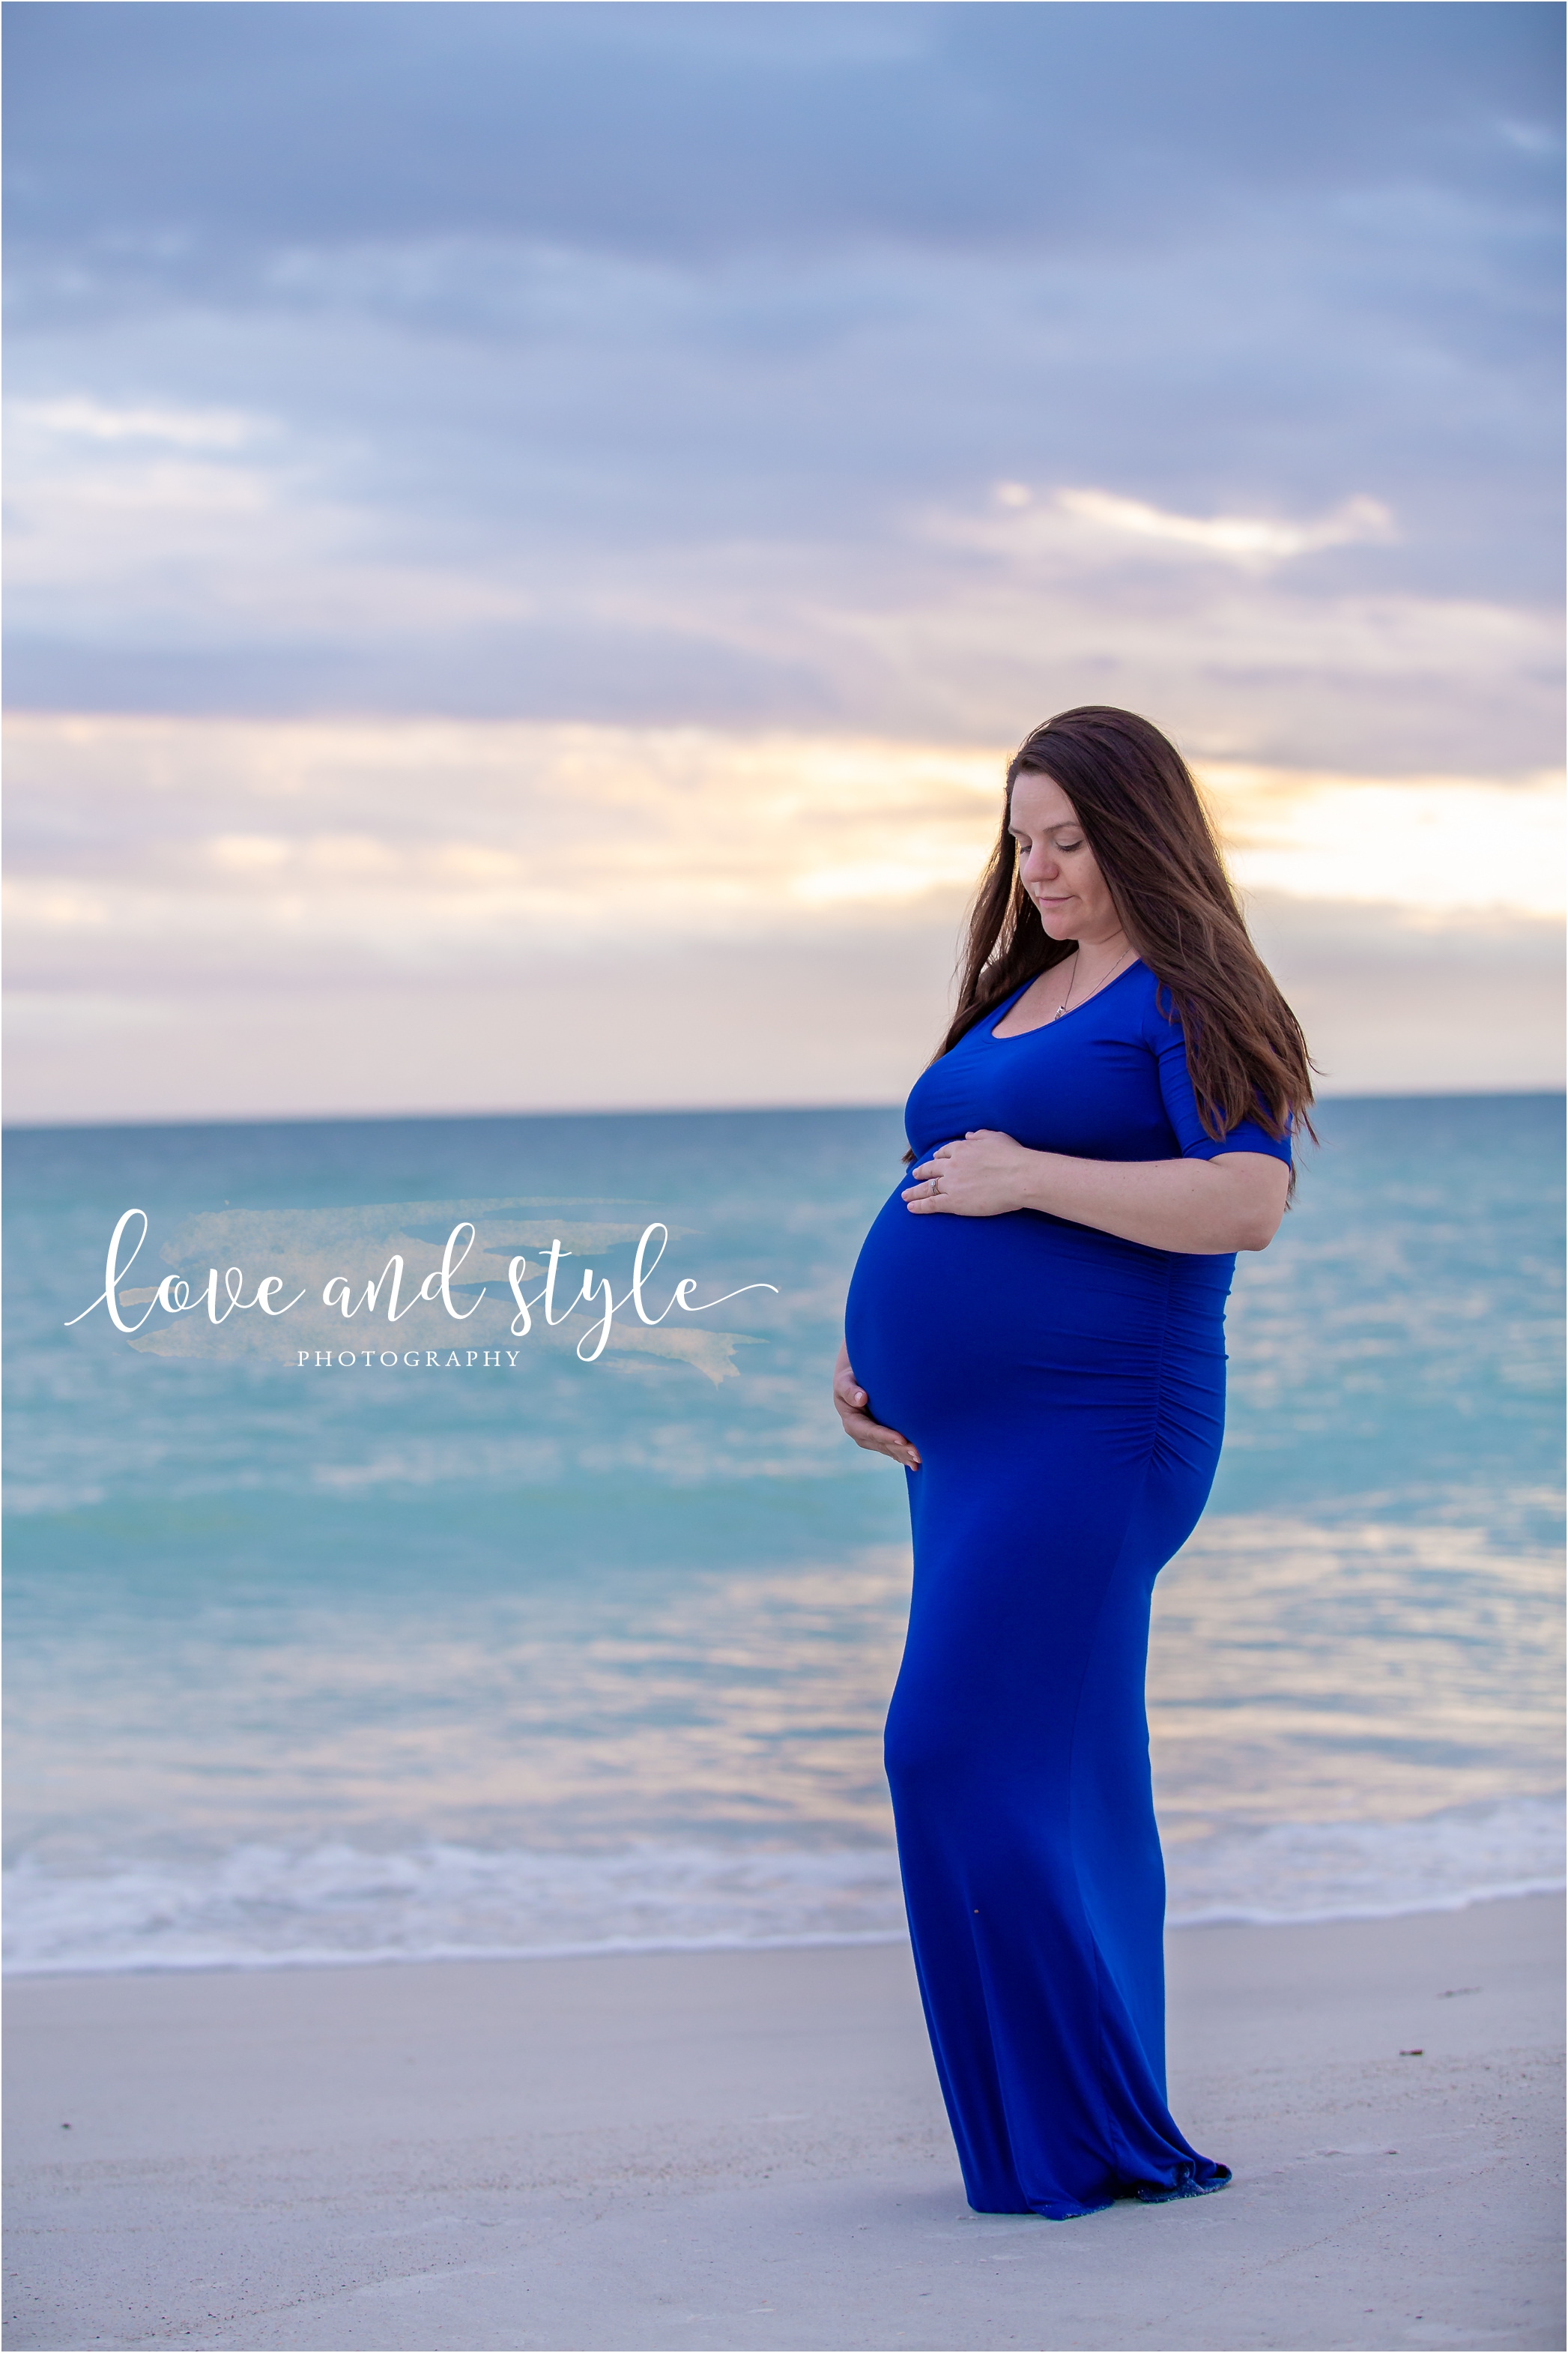 Holmes Beach Photographer with pregnant woman wearing blue posing for a portrait